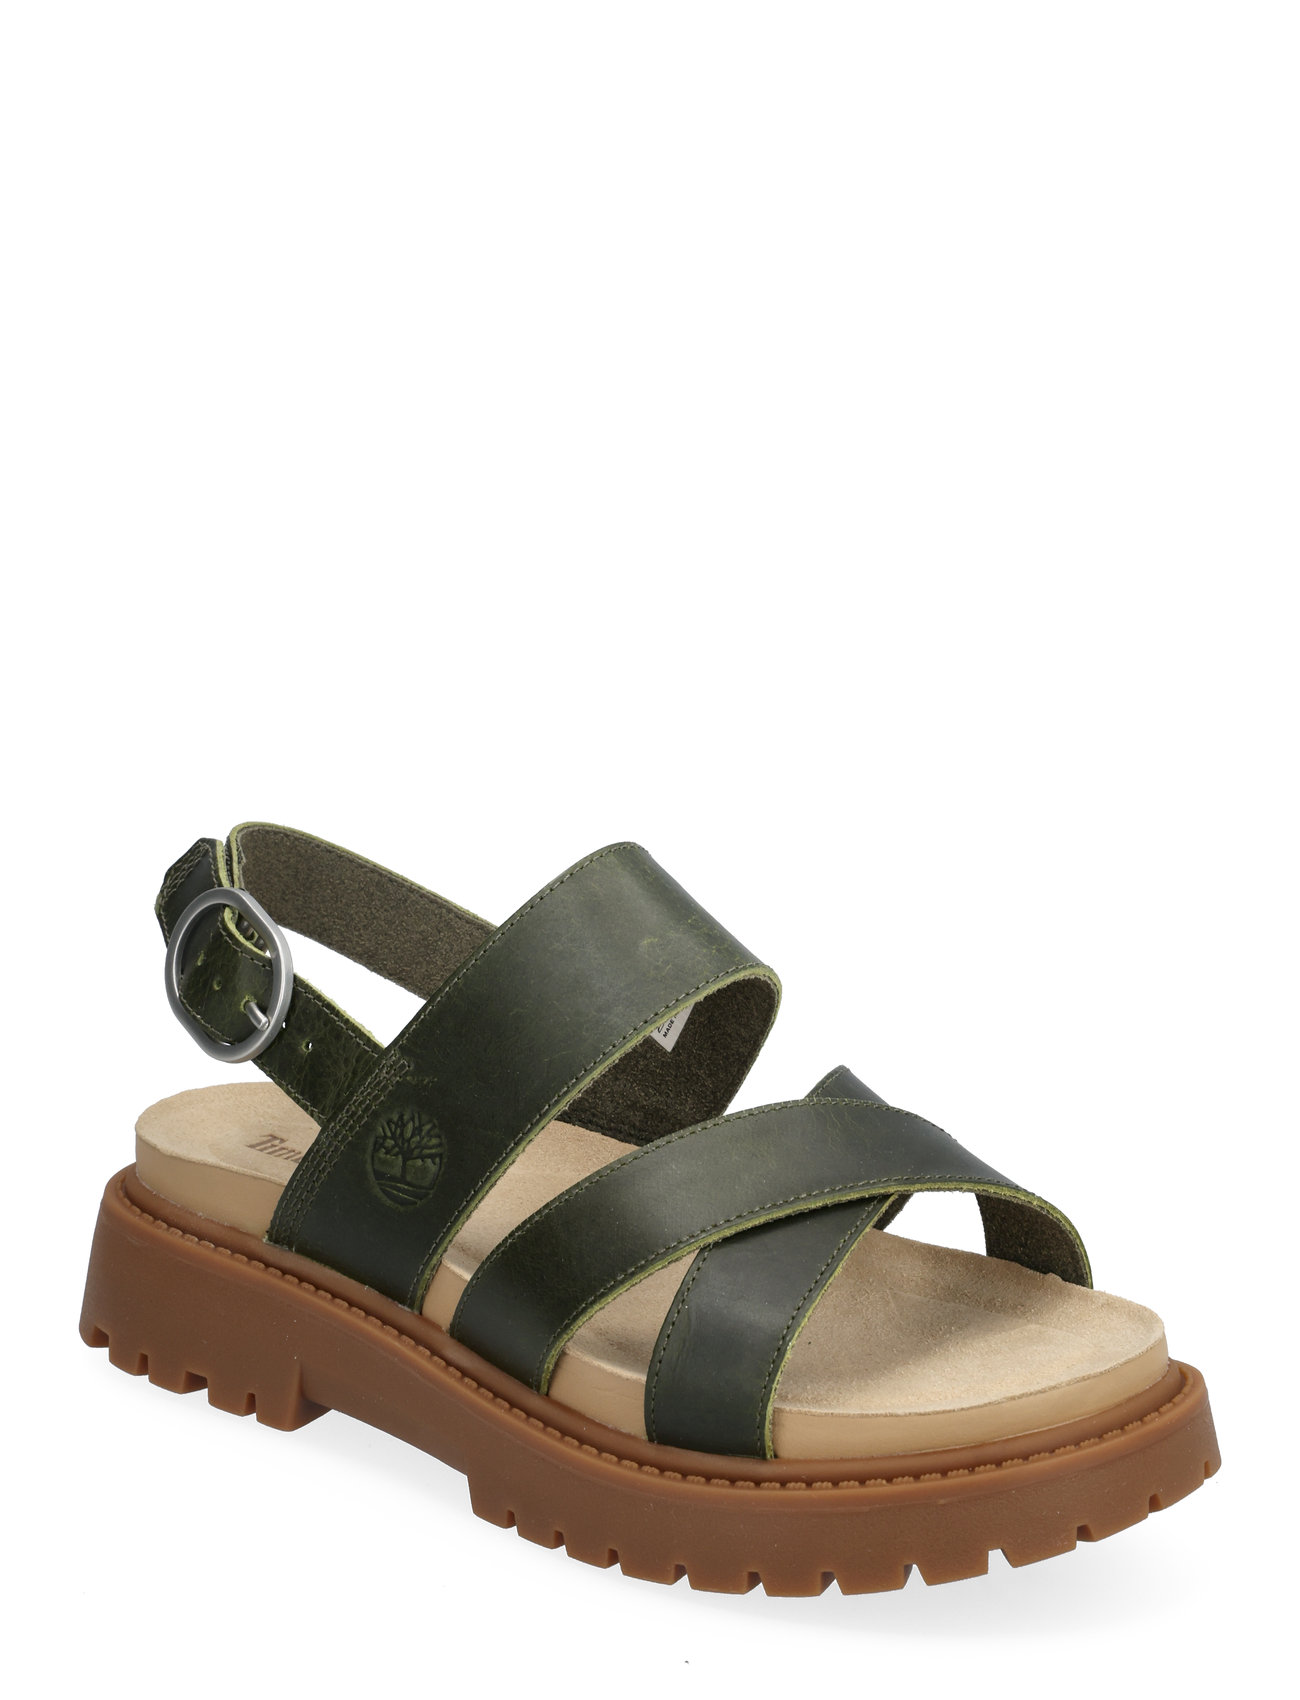 Clairemont Way Backstrap Sandal Dark Green Full Grain Shoes Summer Shoes Gladiator Sandals Green Timberland